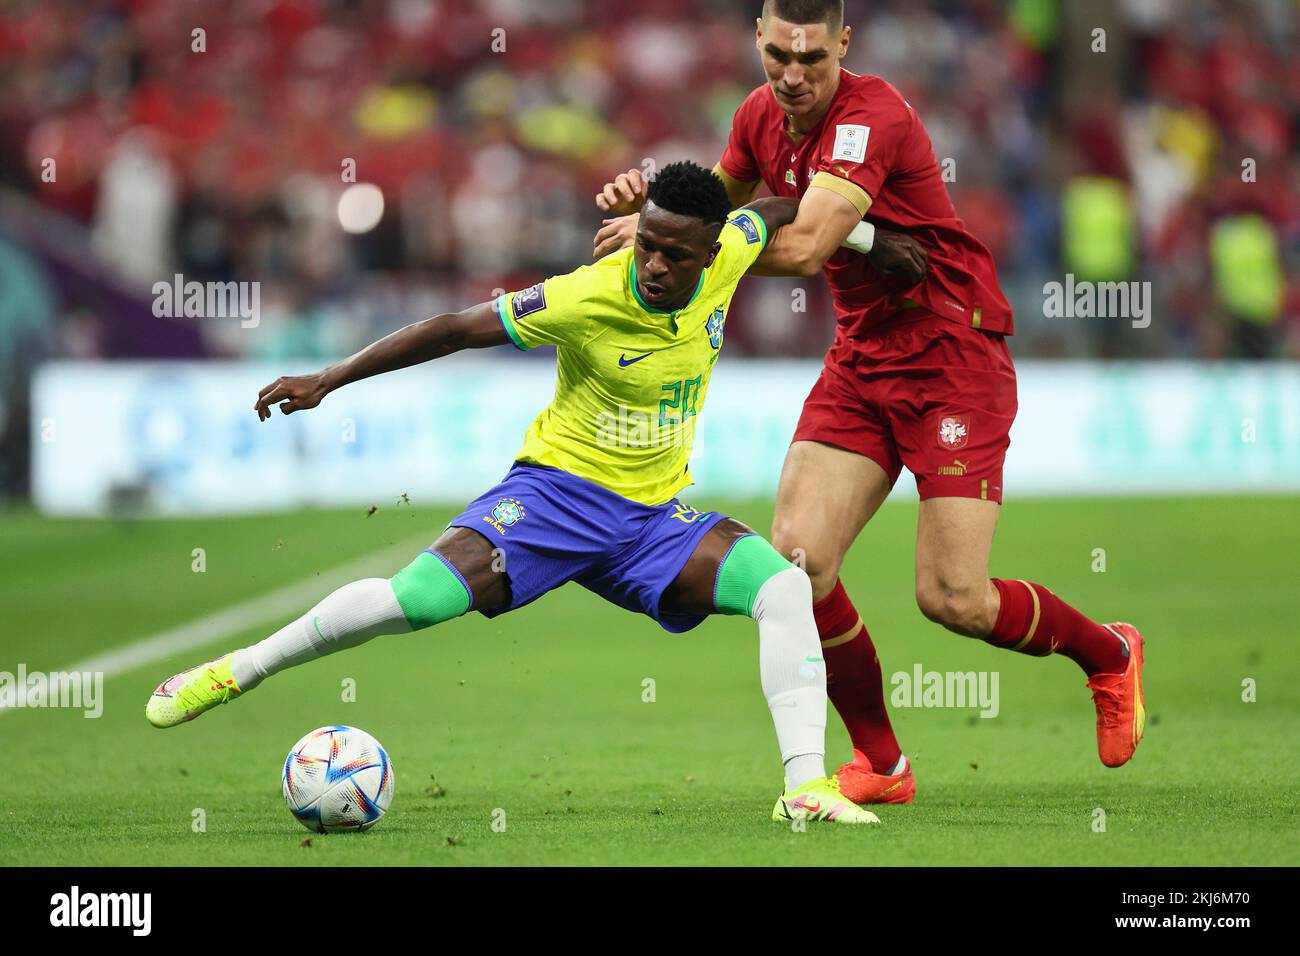 Lusail, Qatar. 24th Nov, 2022. Vinicius Junior (L) of Brazil competes during the Group G match between Brazil and Serbia at the 2022 FIFA World Cup at Lusail Stadium in Lusail, Qatar, Nov. 24, 2022. Credit: Lan Hongguang/Xinhua/Alamy Live News Stock Photo